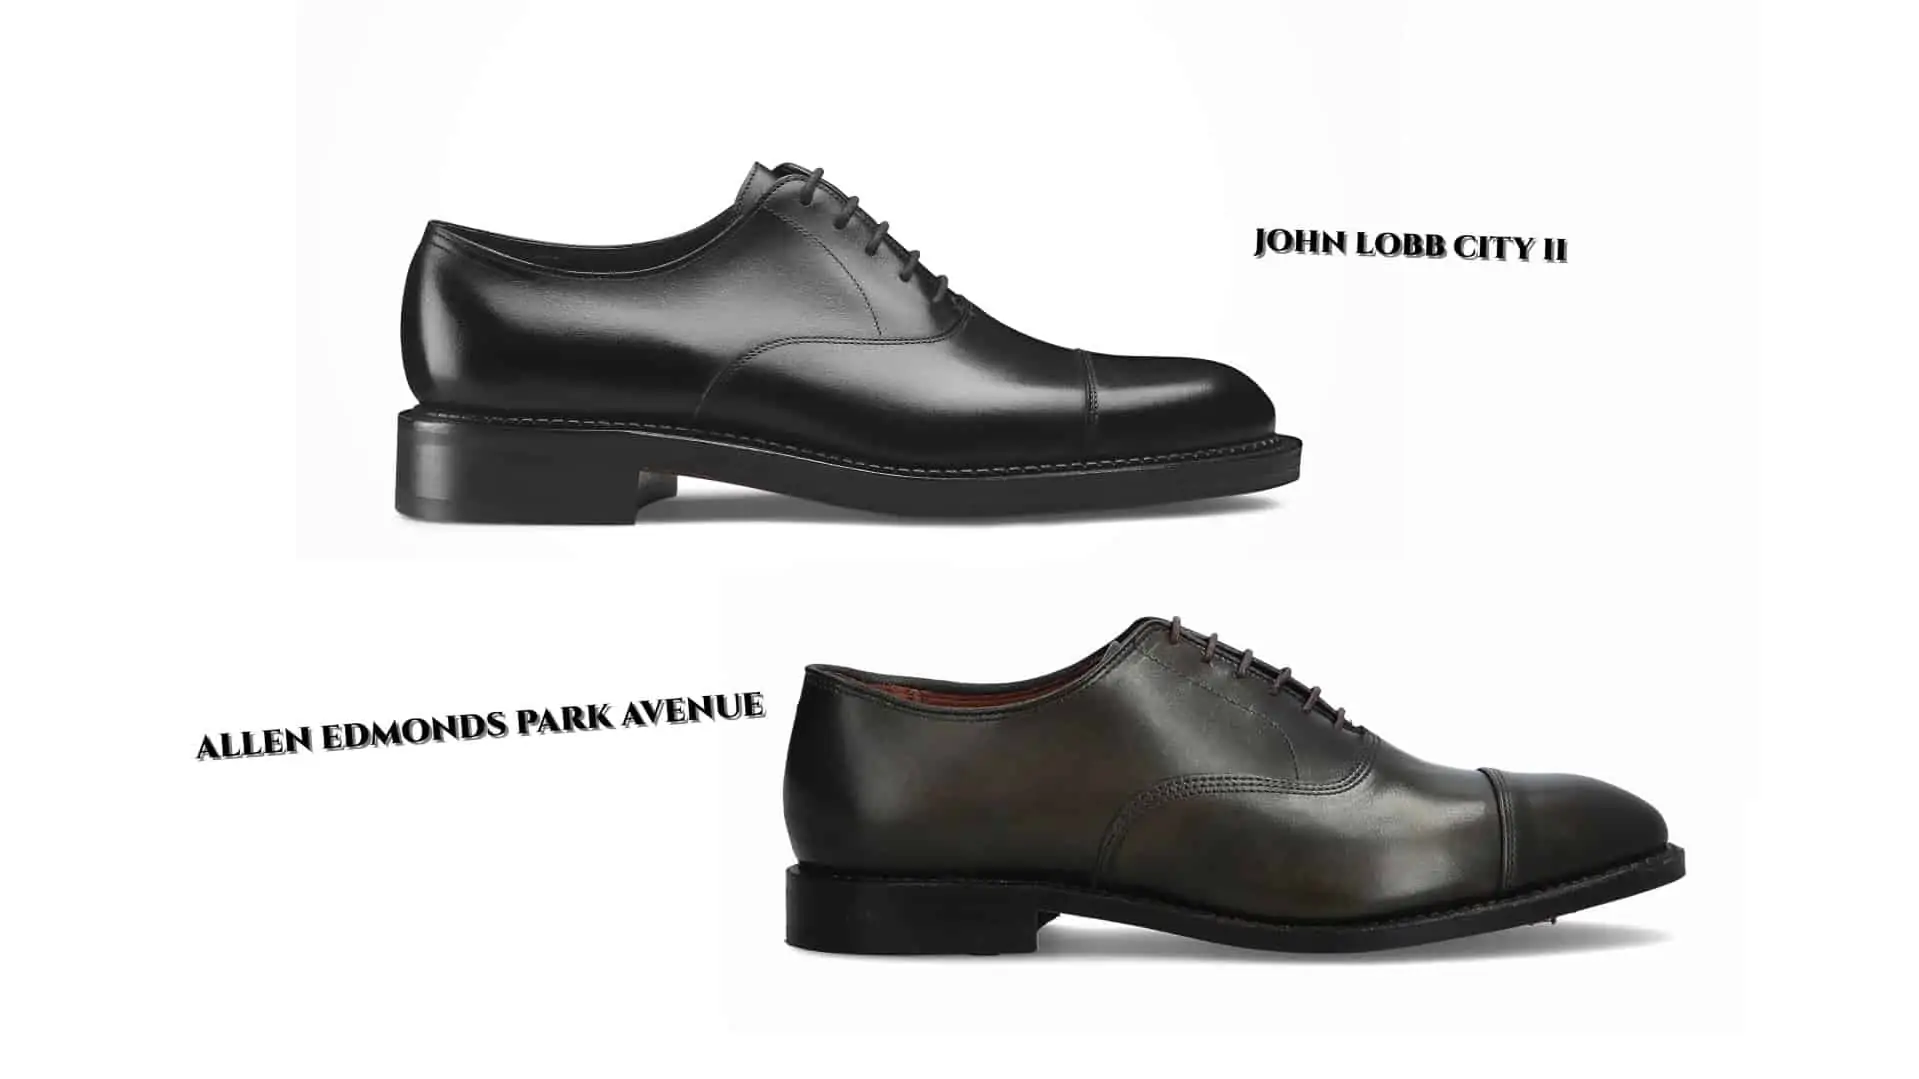 Session by Request, John Lobb